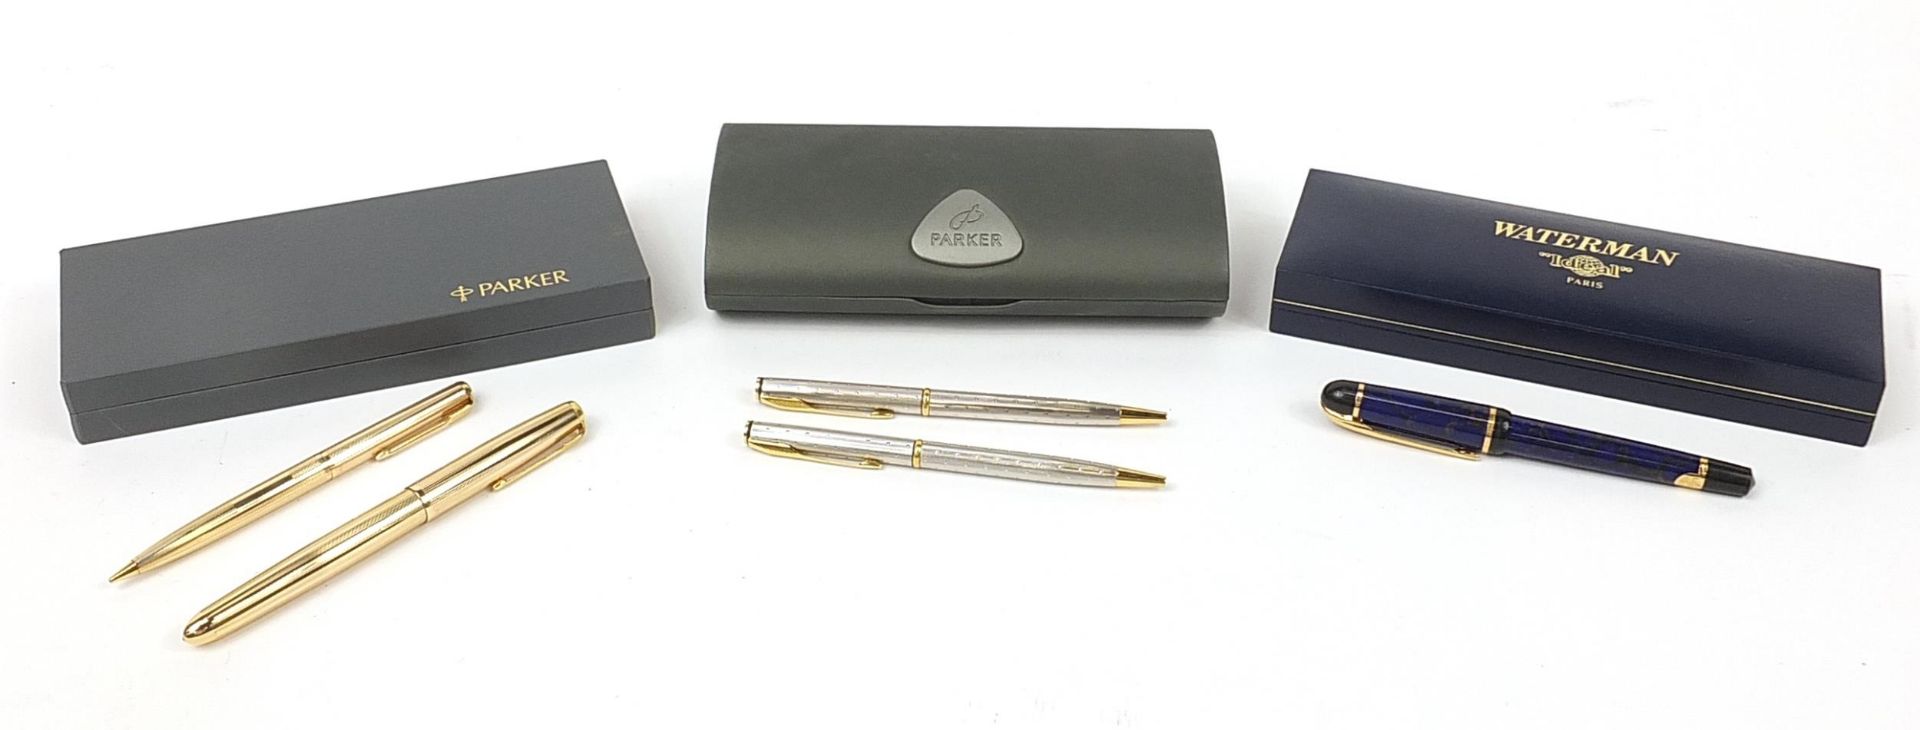 Fountain pens including Watermans Ideal, Parker Insignia and rolled gold Parker 51 fountain pen